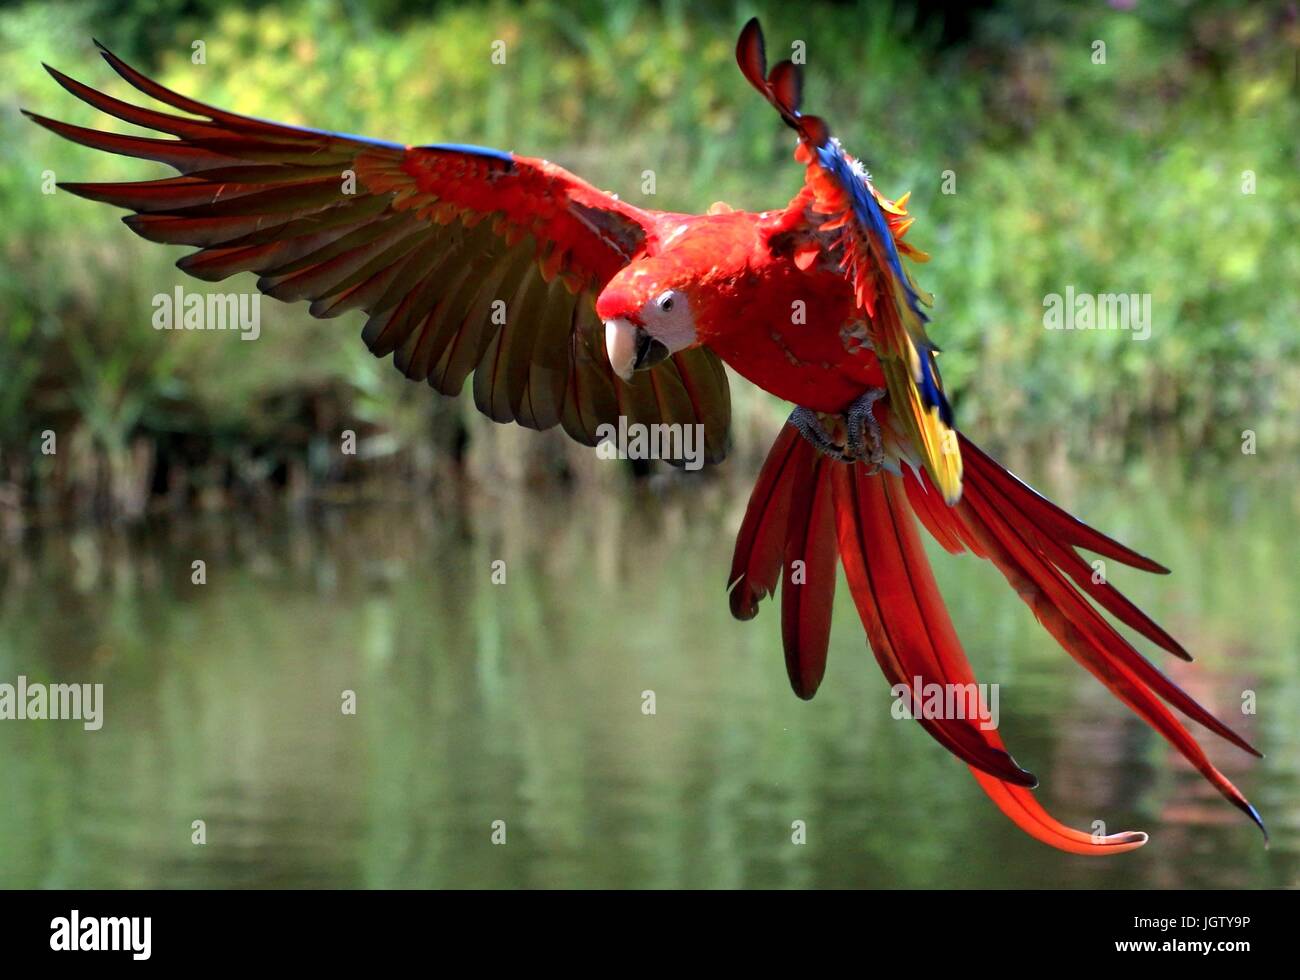 South American Scarlet macaw (Ara macao) in flight,  coming towards the camera, wings outstretched. Stock Photo